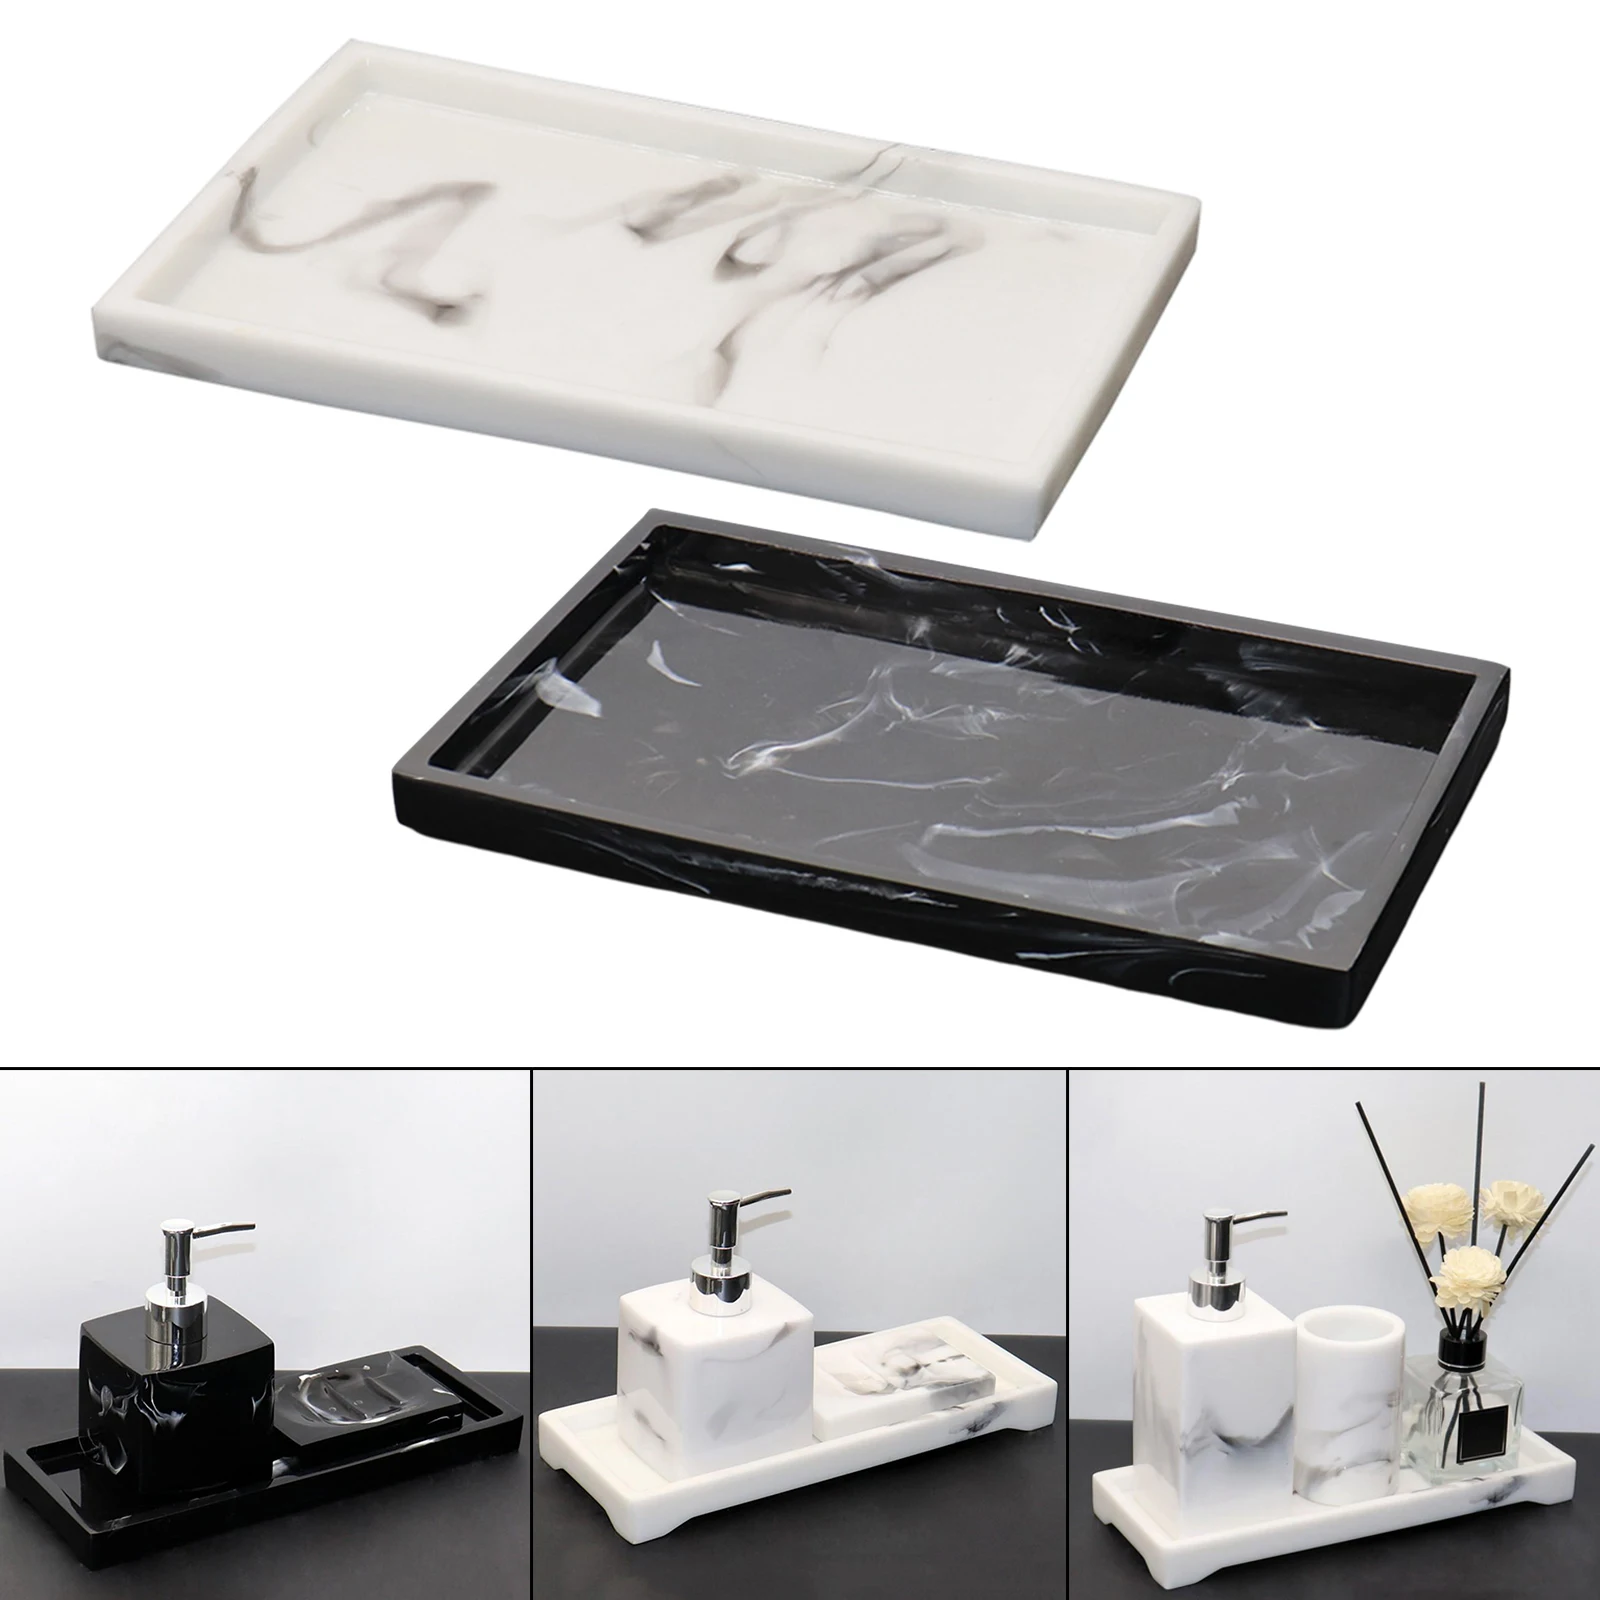 1x Nordic Resin Bathtub Tray Countertop Dispenser for Jewelry Candles Soap